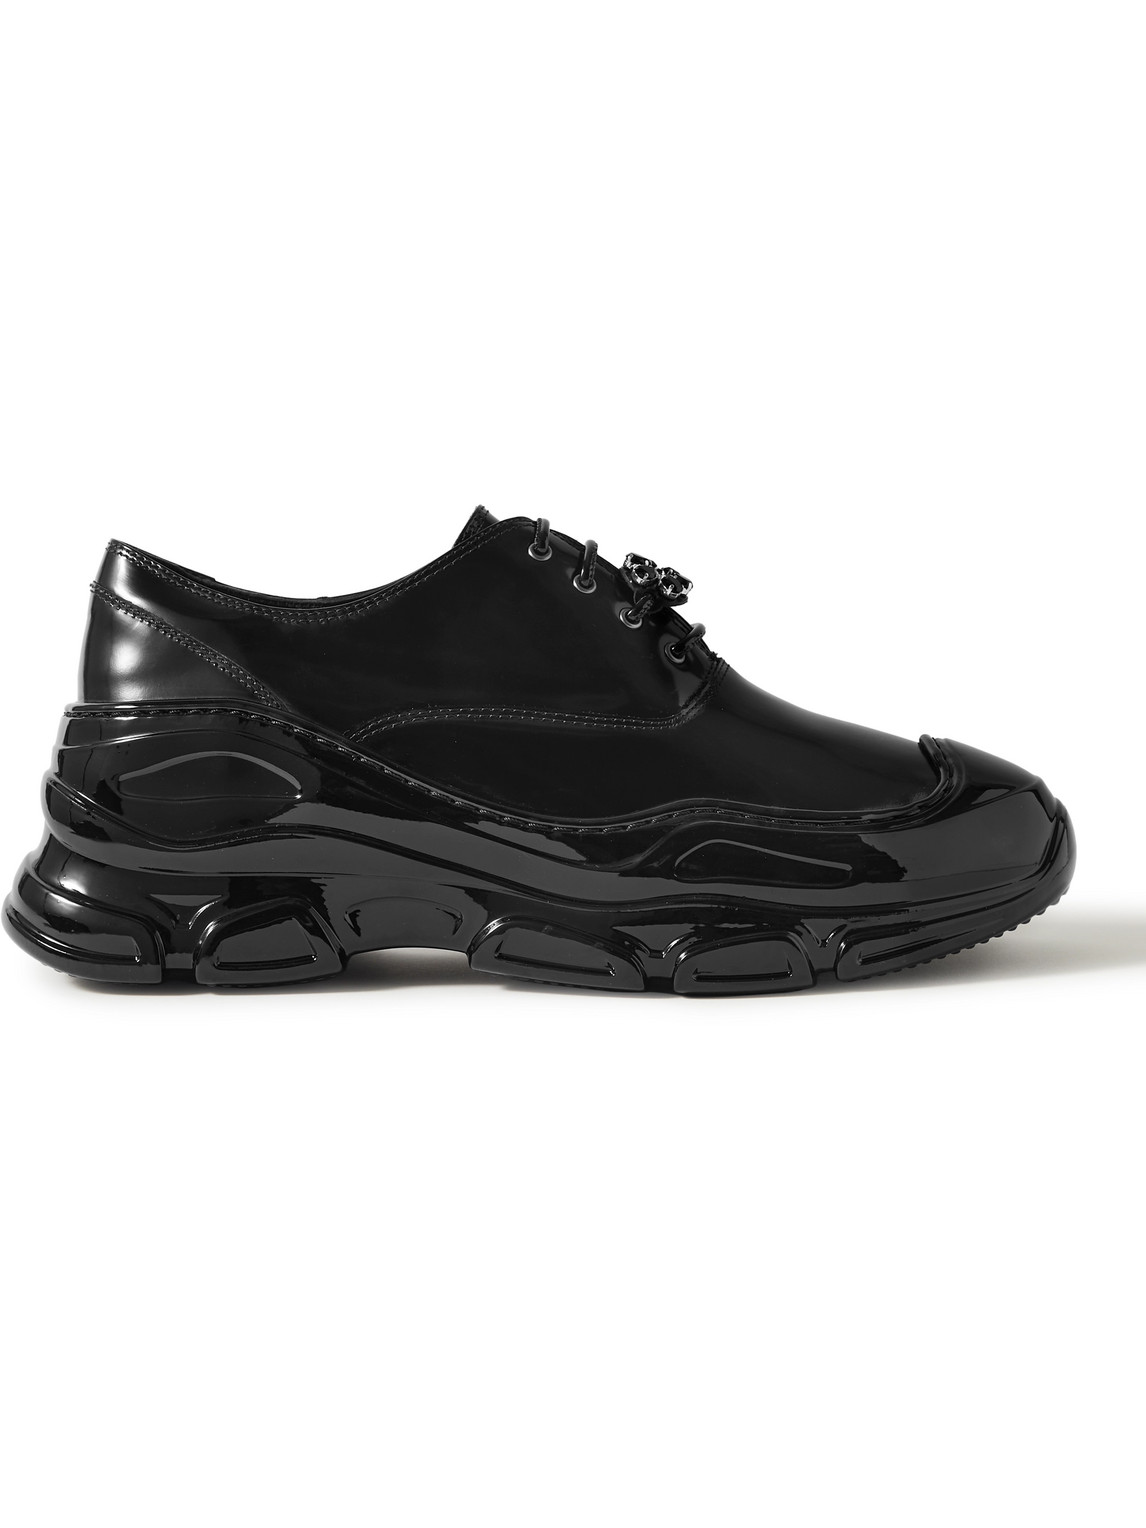 SIMONE ROCHA EMBELLISHED PATENT-LEATHER BROGUES